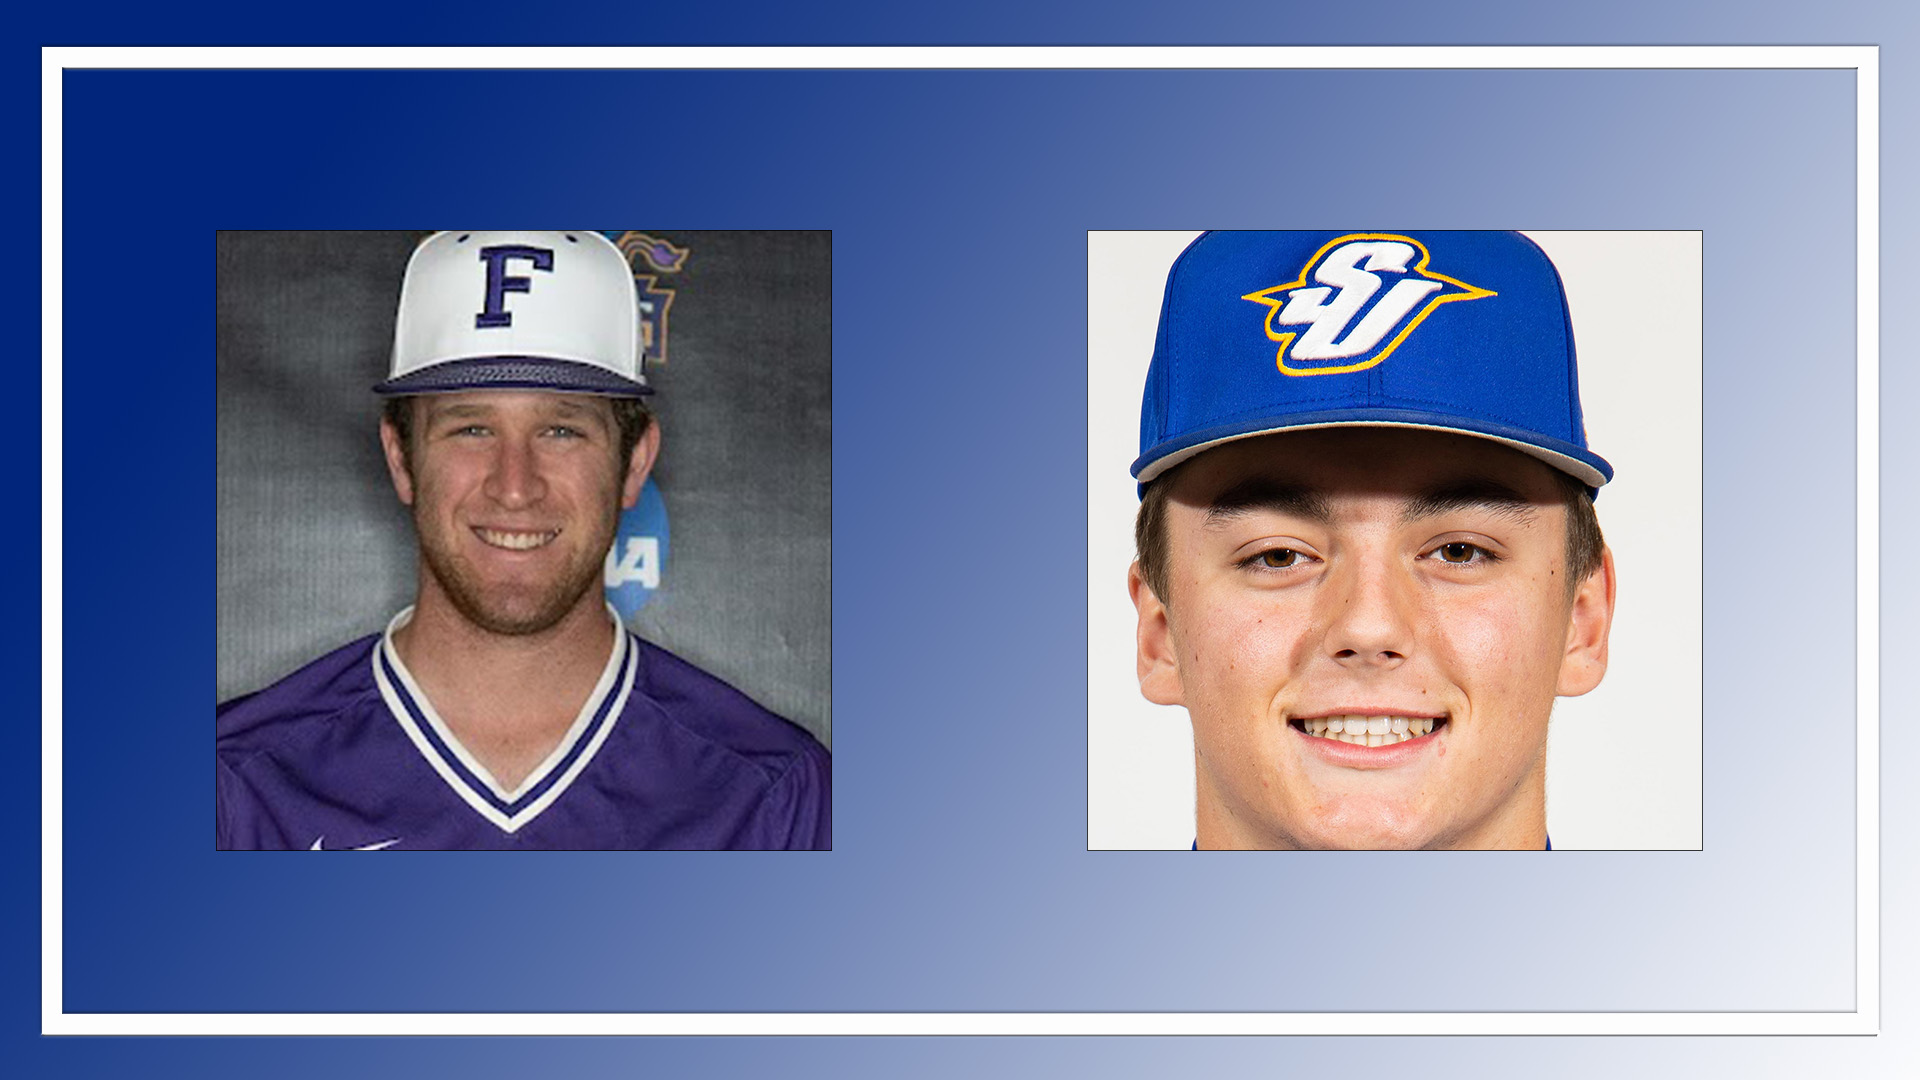 SLIAC Players of the Week - May 9